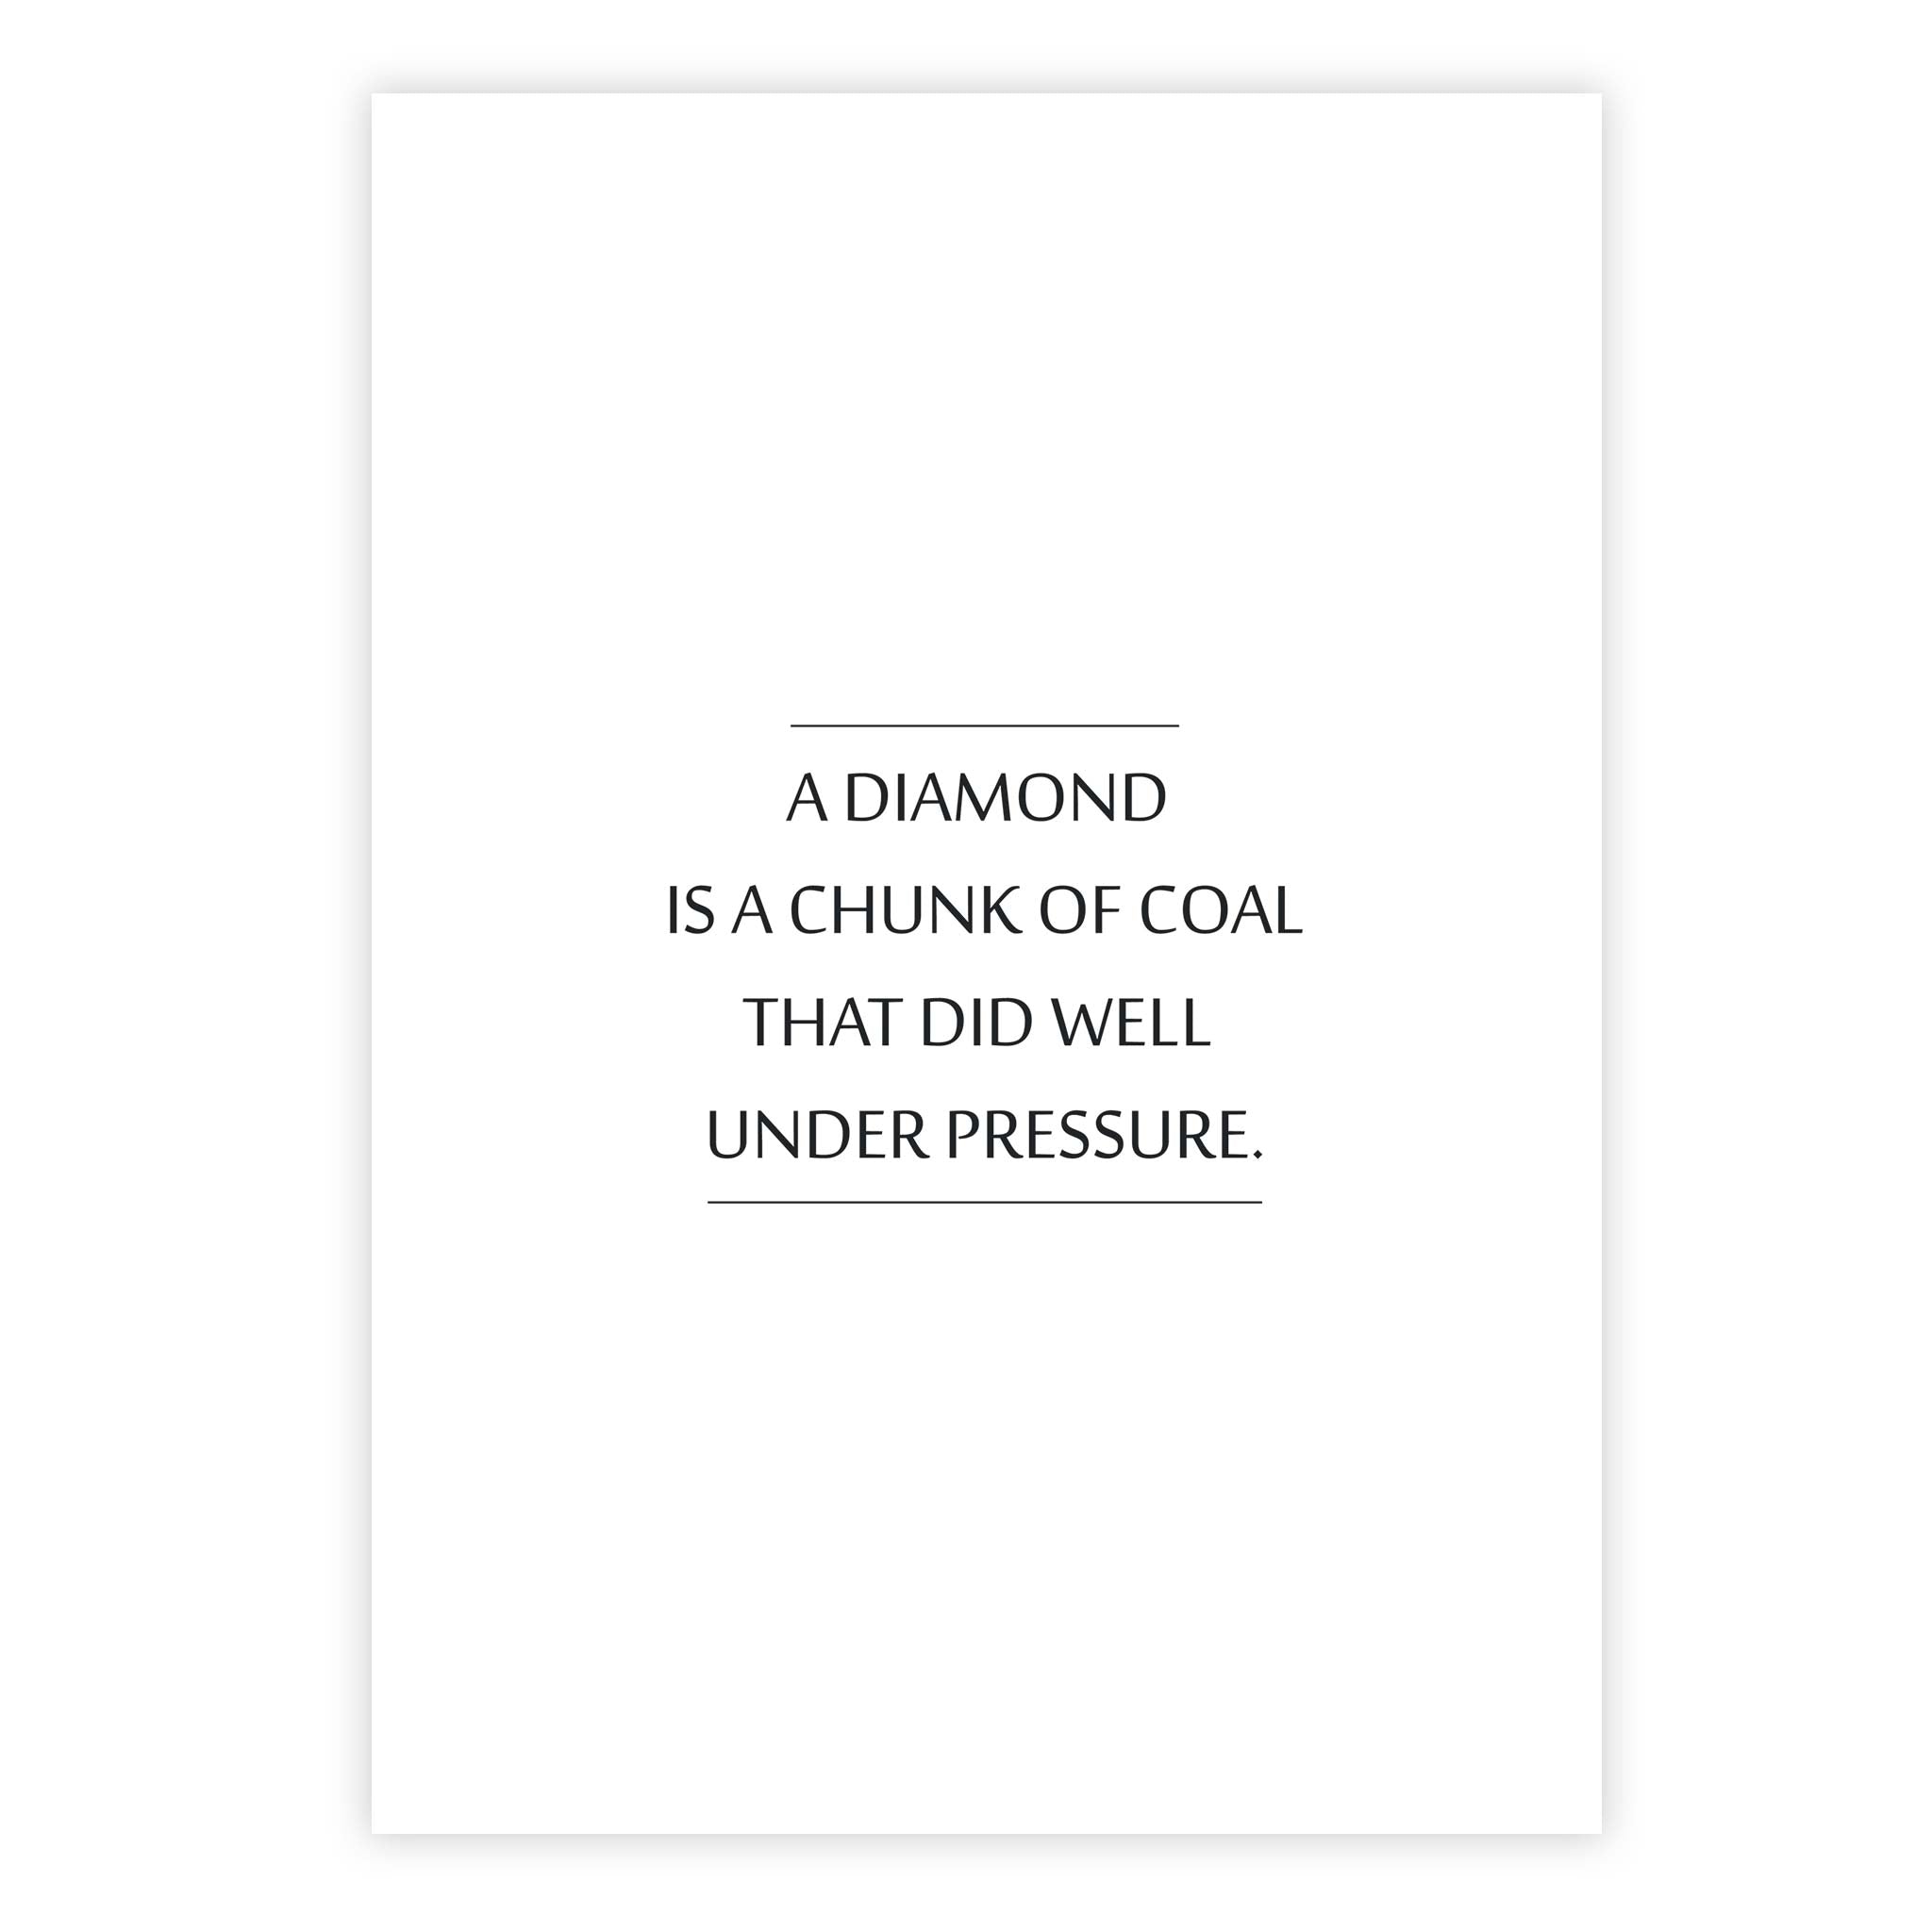 A diamond is a chunk of coal that did well under pressure